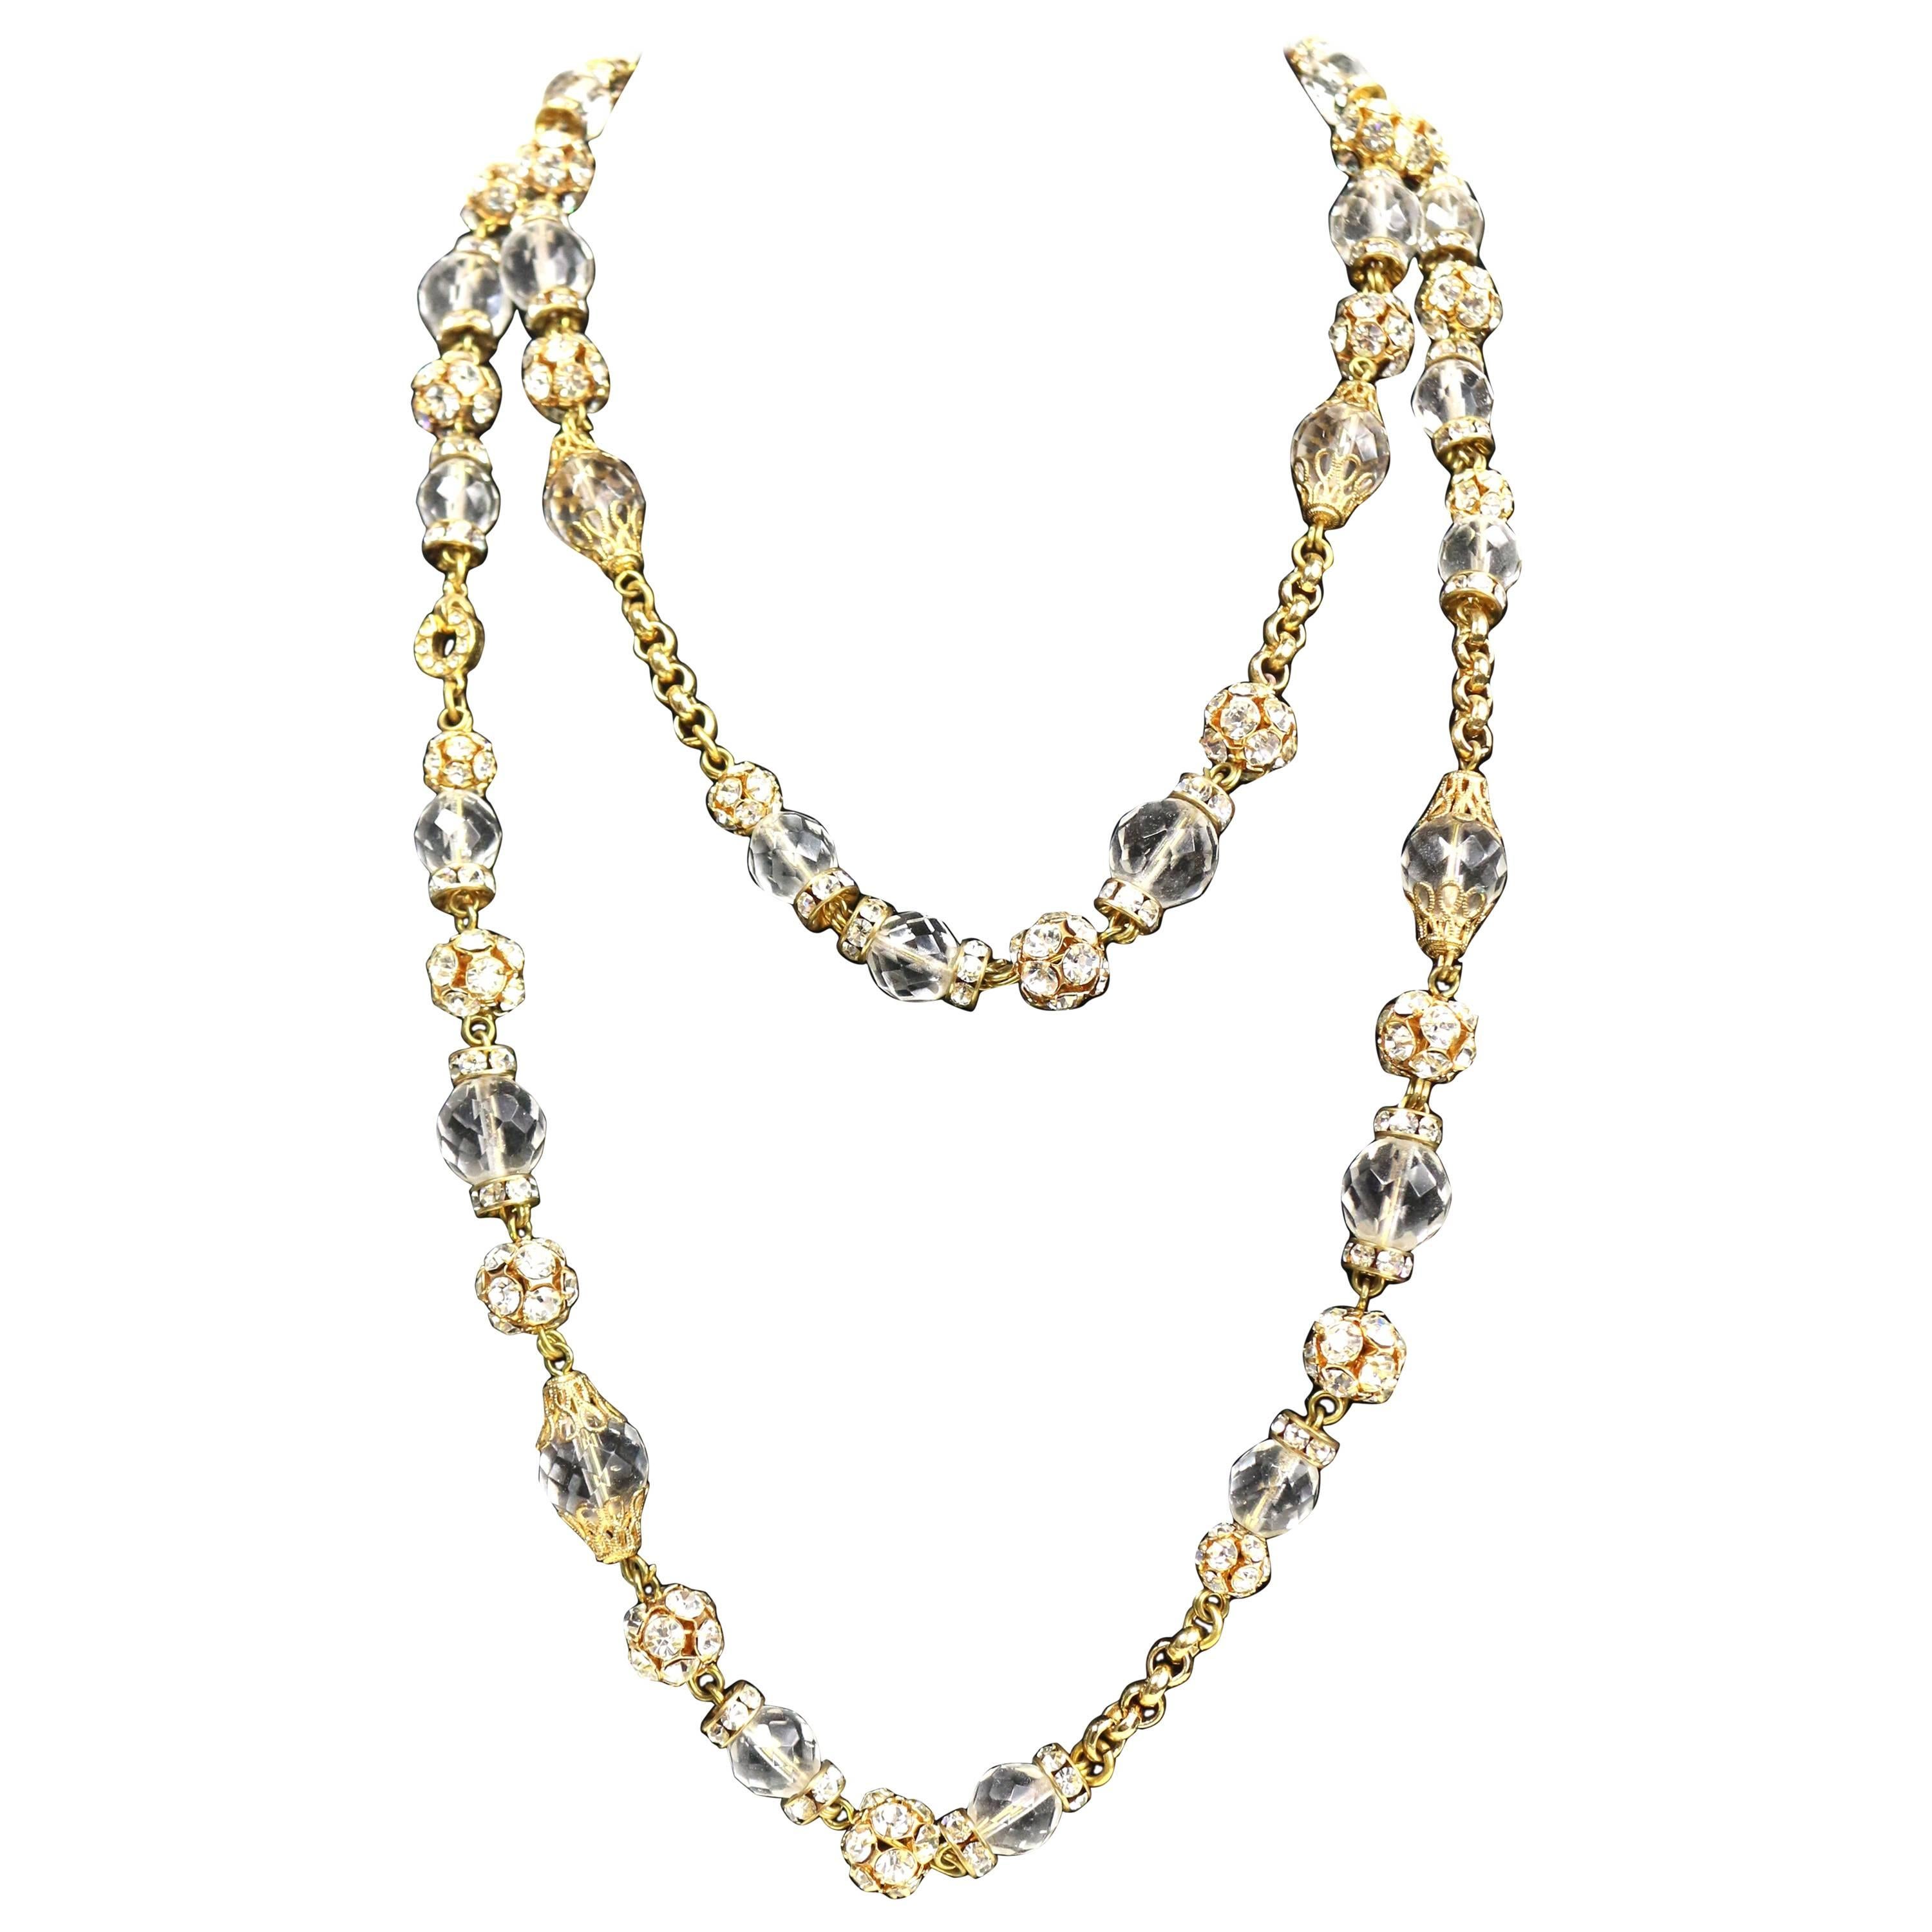 Escada Gold Toned Metal with Crystal Rhinestones and Glass Chain Necklace